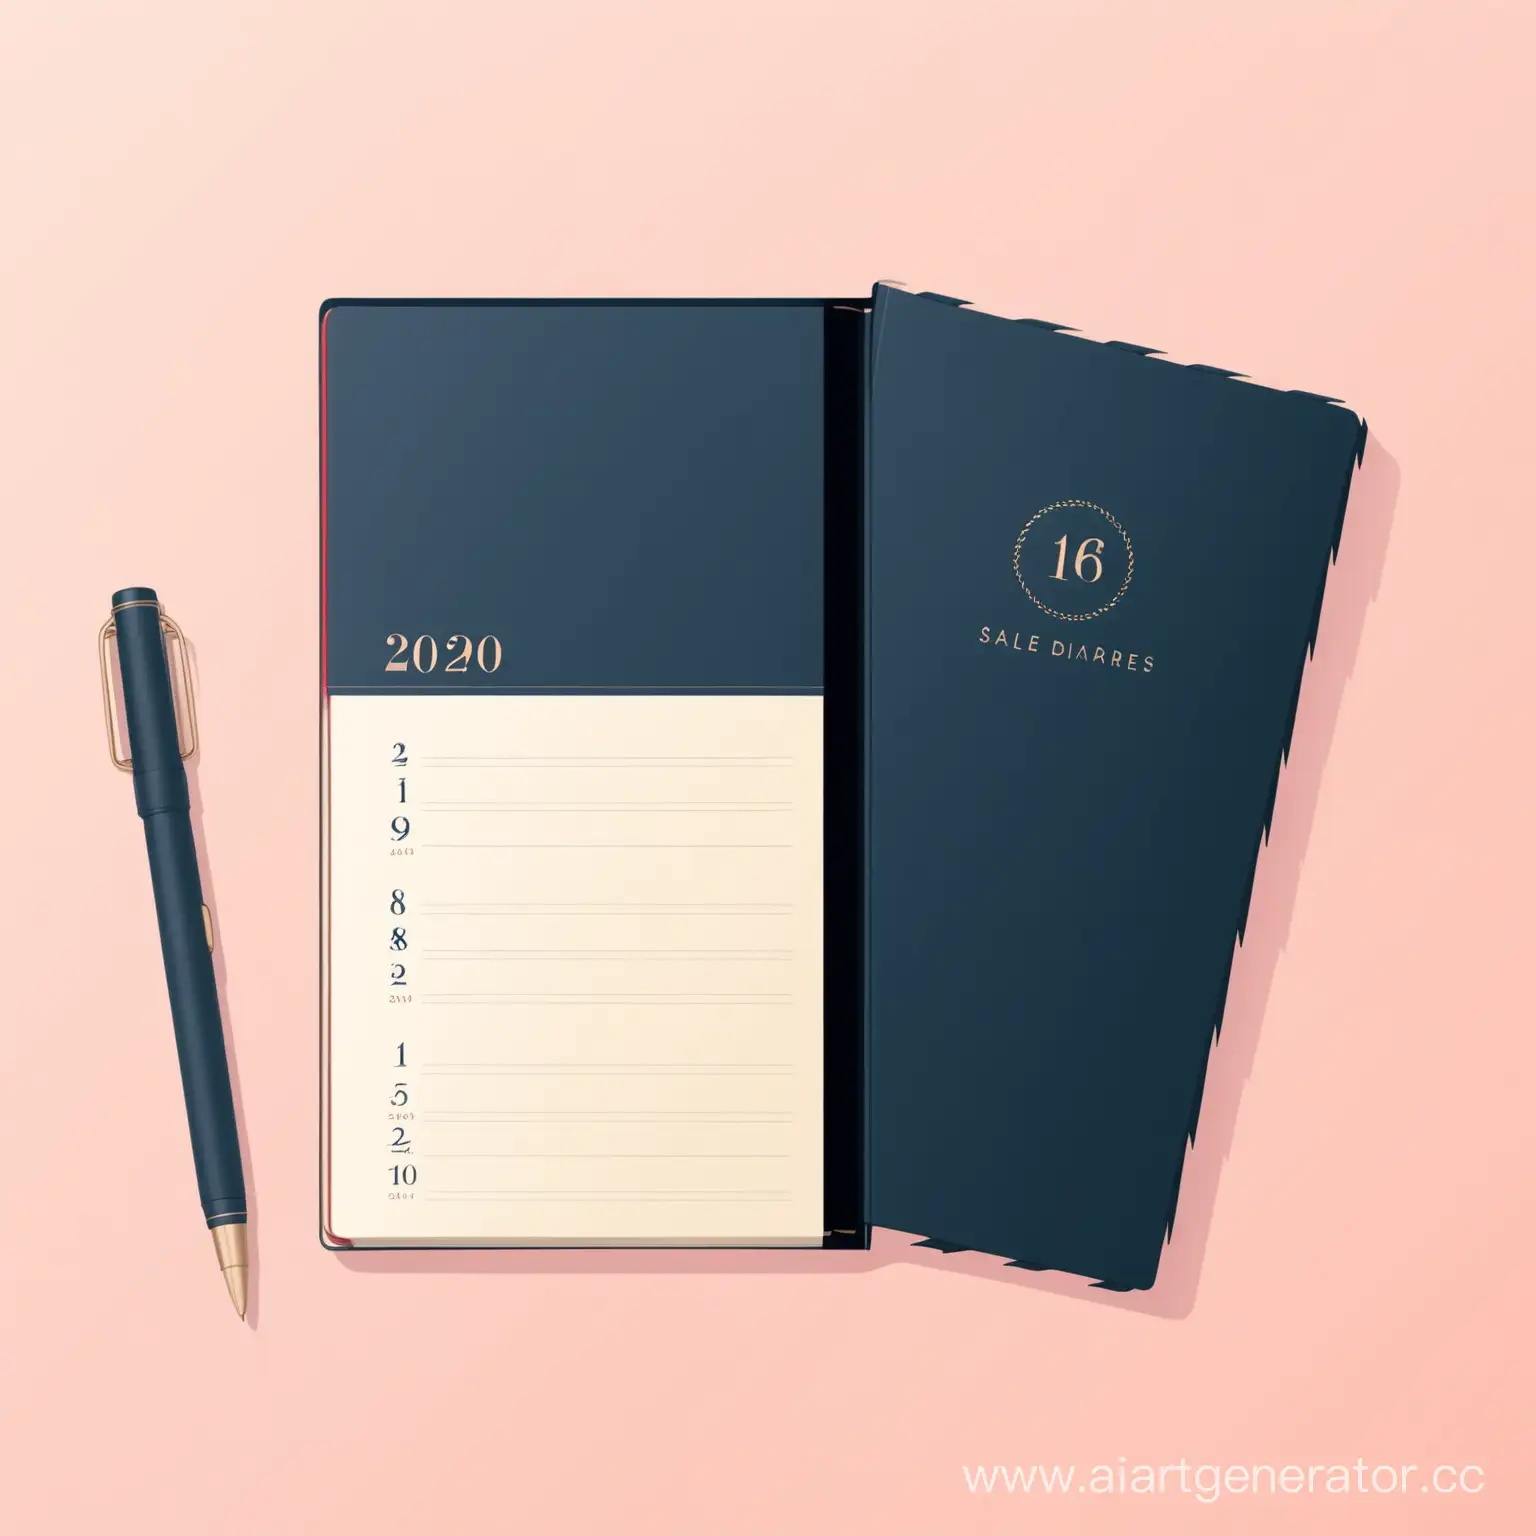 video for the stationery website, sale of dated diaries in a minimalist style